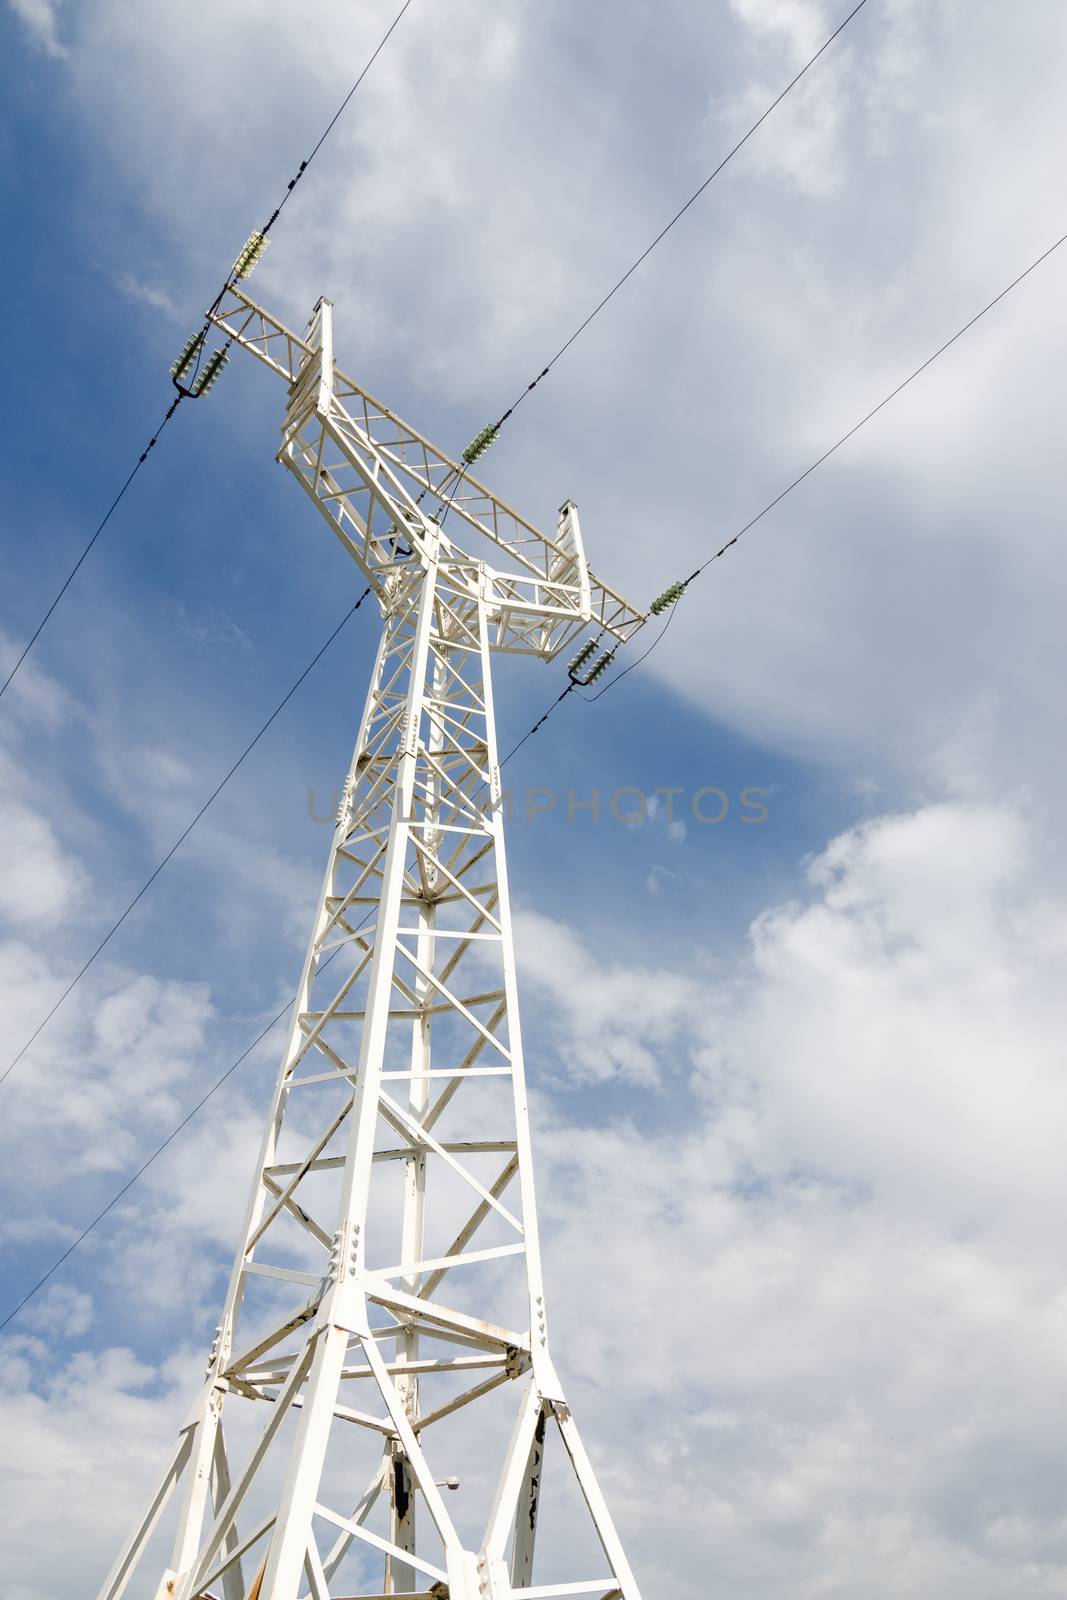 towers for power transmission lines high voltage